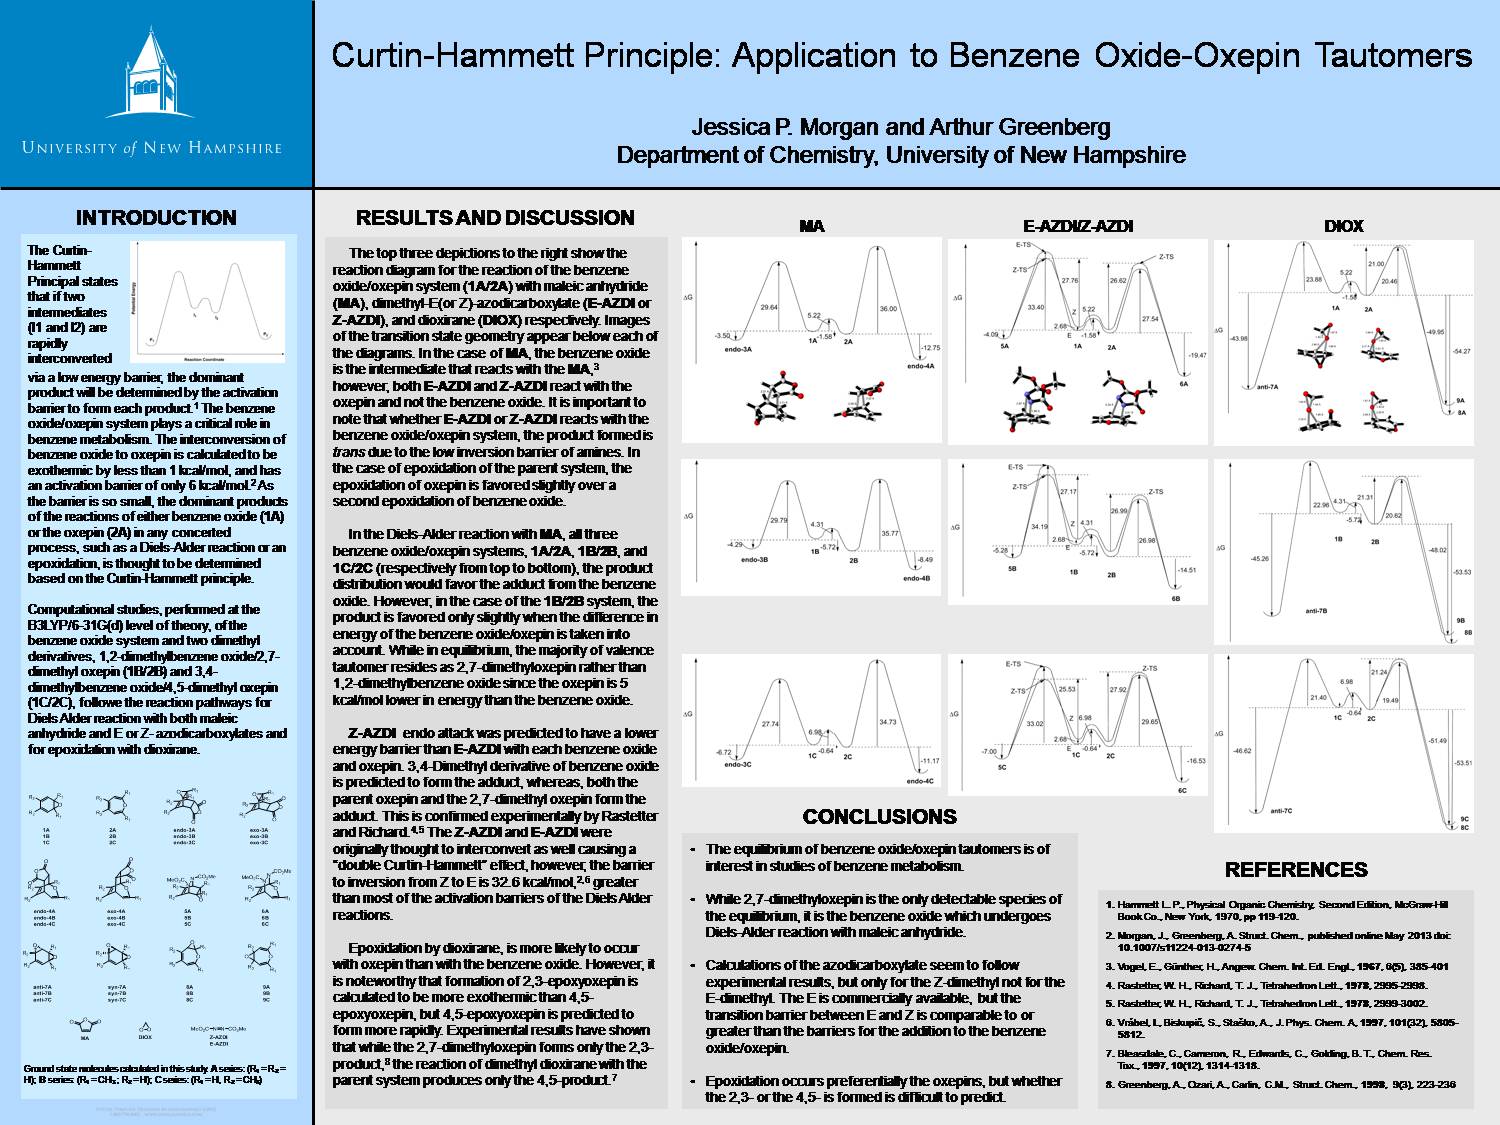 Curtin-Hammett Principle: Application To Benzene Oxide-Oxepin Tautomers by jessmorgan1178